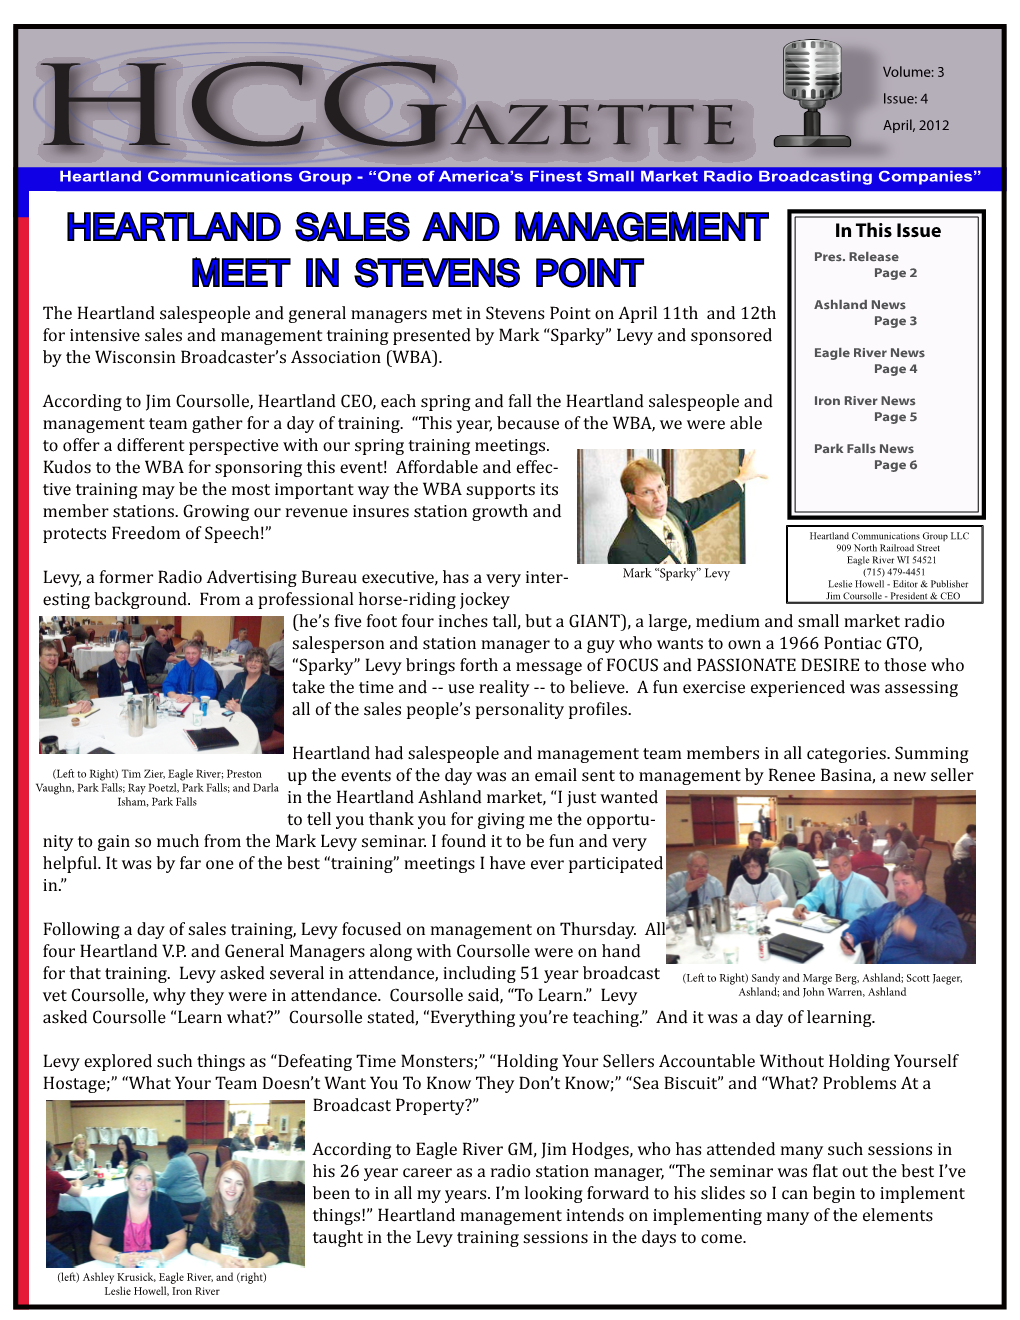 April, 2012 Heartland Communications Group - “One of America’S Finest Small Market Radio Broadcasting Companies”